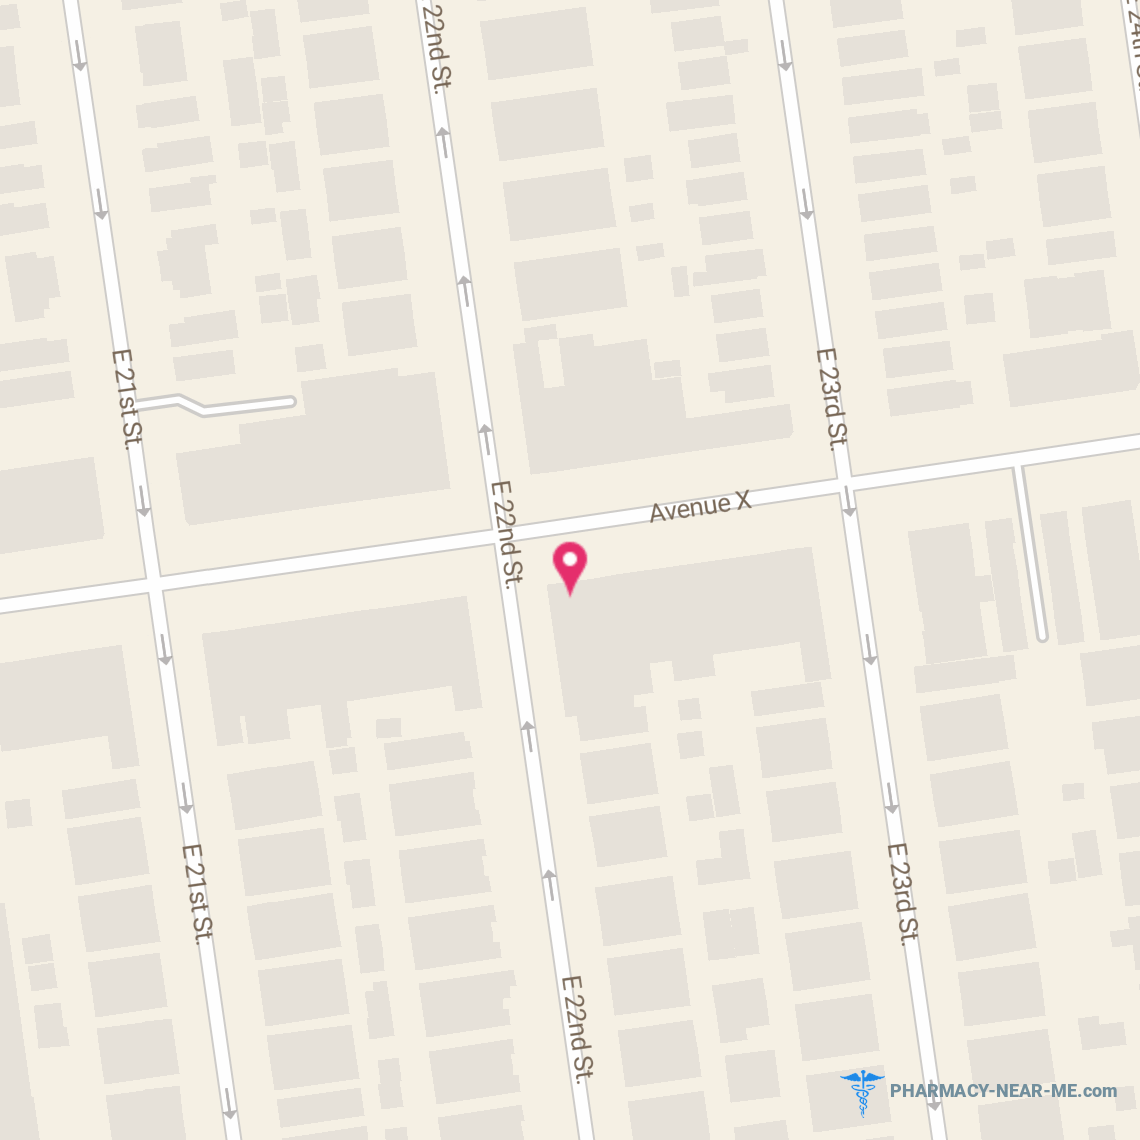 GRAMERCY DRUGS - Pharmacy Hours, Phone, Reviews & Information: 2218 Avenue X, Brooklyn, New York 11235, United States